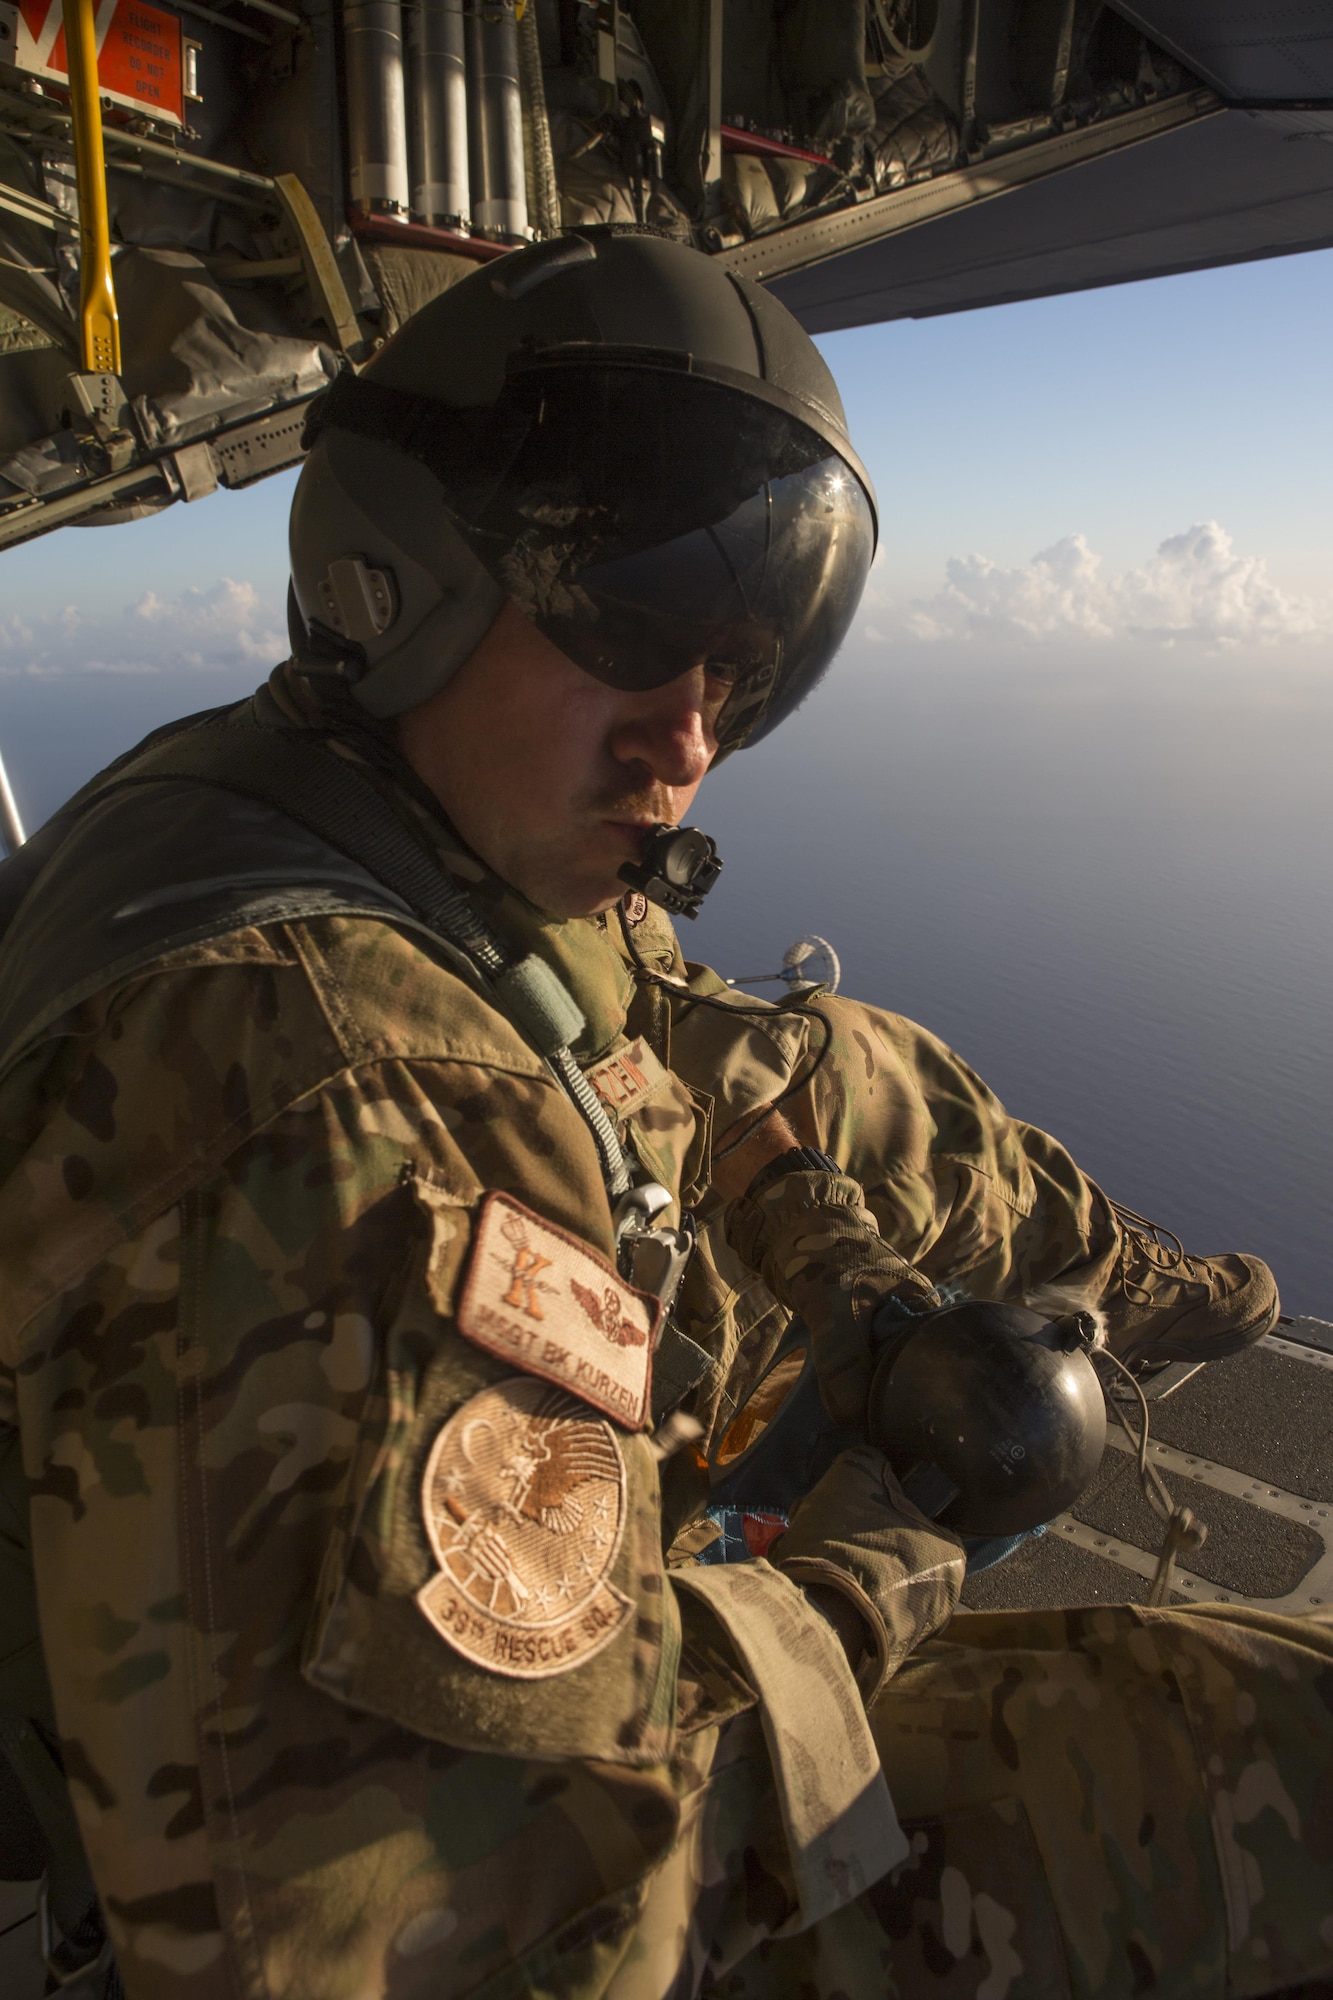 Master Sgt. Bob Kurzen, HC-130P/N "King" loadmaster is part of  concerted rescue effort of approximately 80 wing personnel from the 920th Rescue Wing who rescued two German citizens in distress at sea July 7, 2017 and into July 8. The victim's vessel caught fire approximately 500 nautical miles off the east coast of southern Florida. At the request of the U.S. Coast Guard's Seventh District in Miami, the 920th RQW was alerted by the Air Force Rescue Coordination Center at Tyndall Air Force Base, Florida, to assist in the long-range search and rescue. Approximately 80 wing Citizen Airmen and four wing aircraft helped execute the rescue mission to include, maintenance, operations and support personnel. (U.S. Air Force photo by Master Sgt. Mark Borosch)
